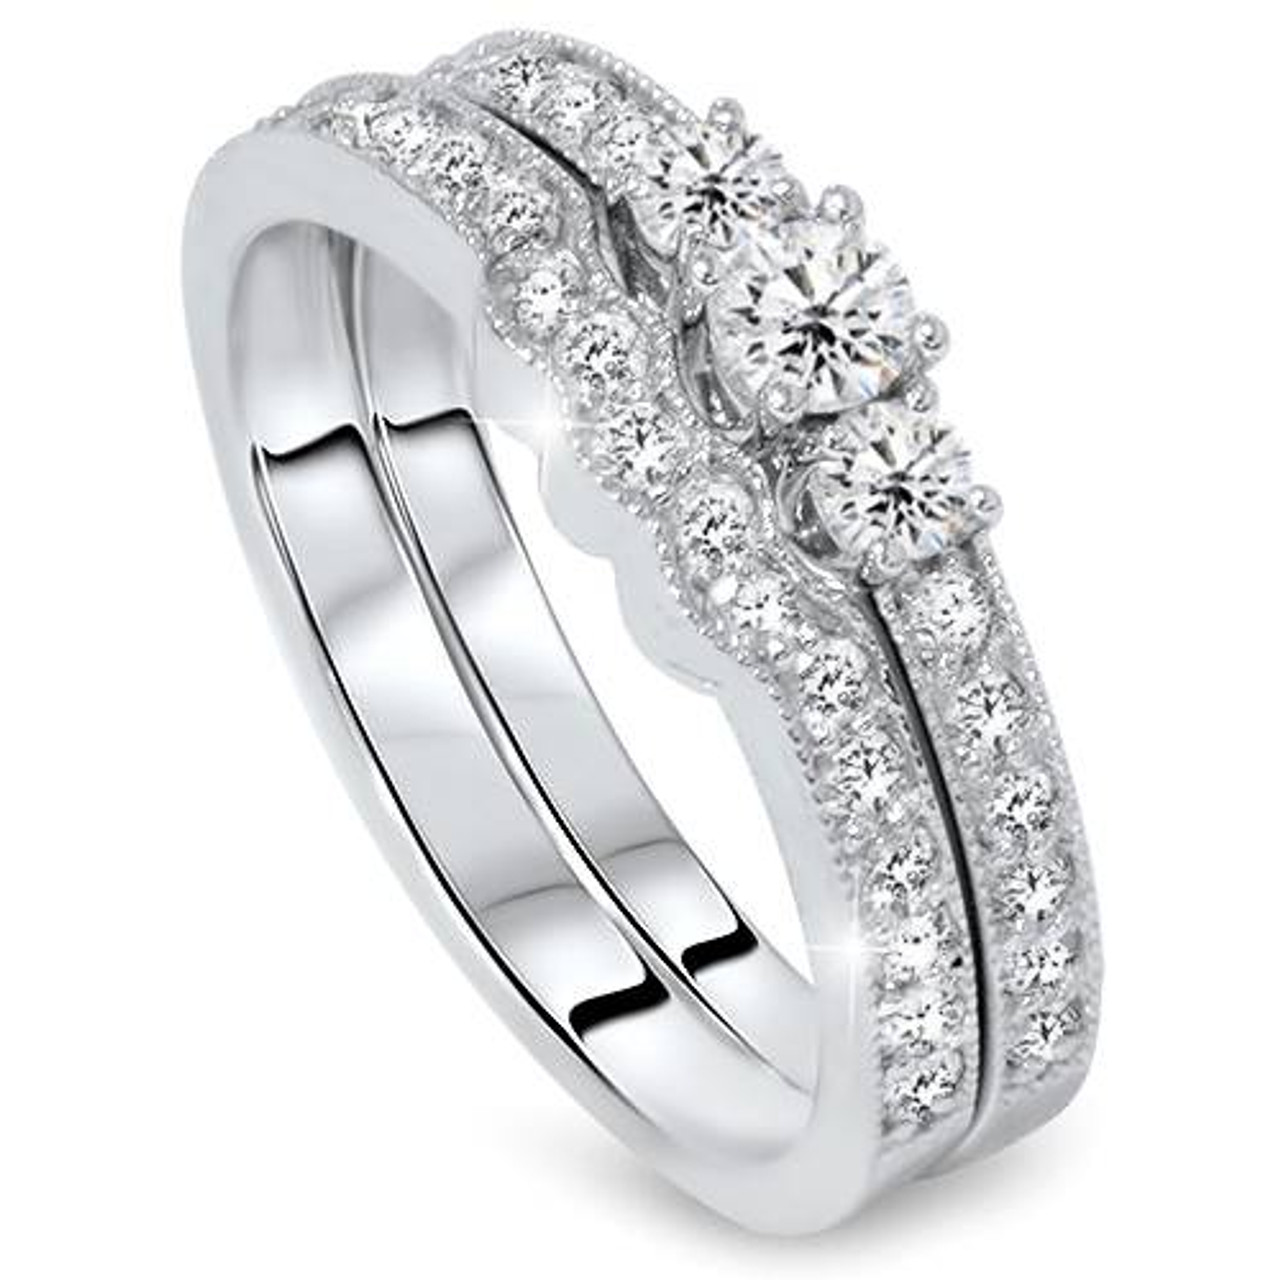 Solid Matching 003 Carat Bestseller Classic 3mm His and Hers Diamond  Wedding Ring Set